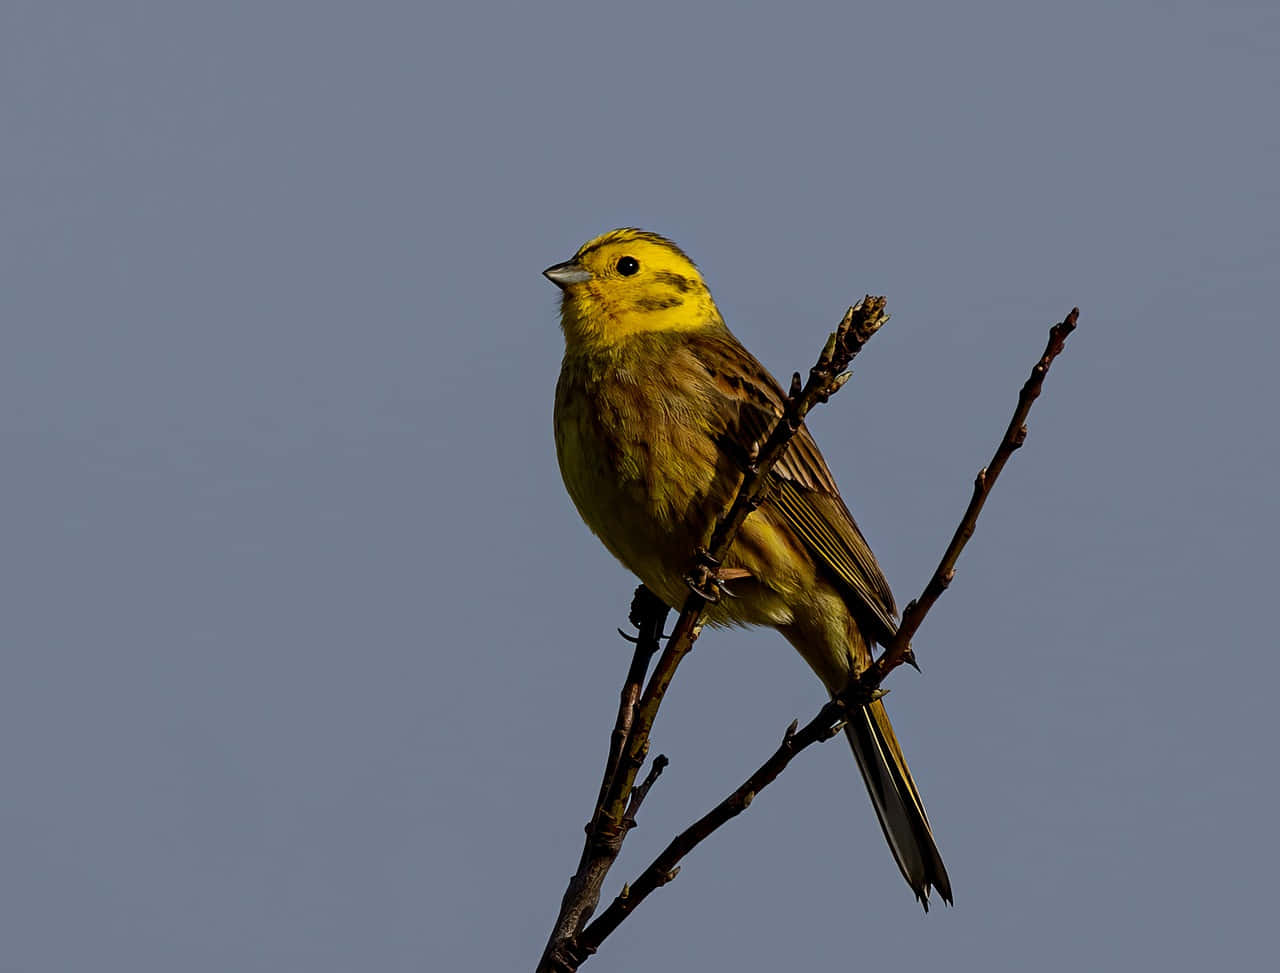 Stunning Yellowhammer perched on a branch Wallpaper